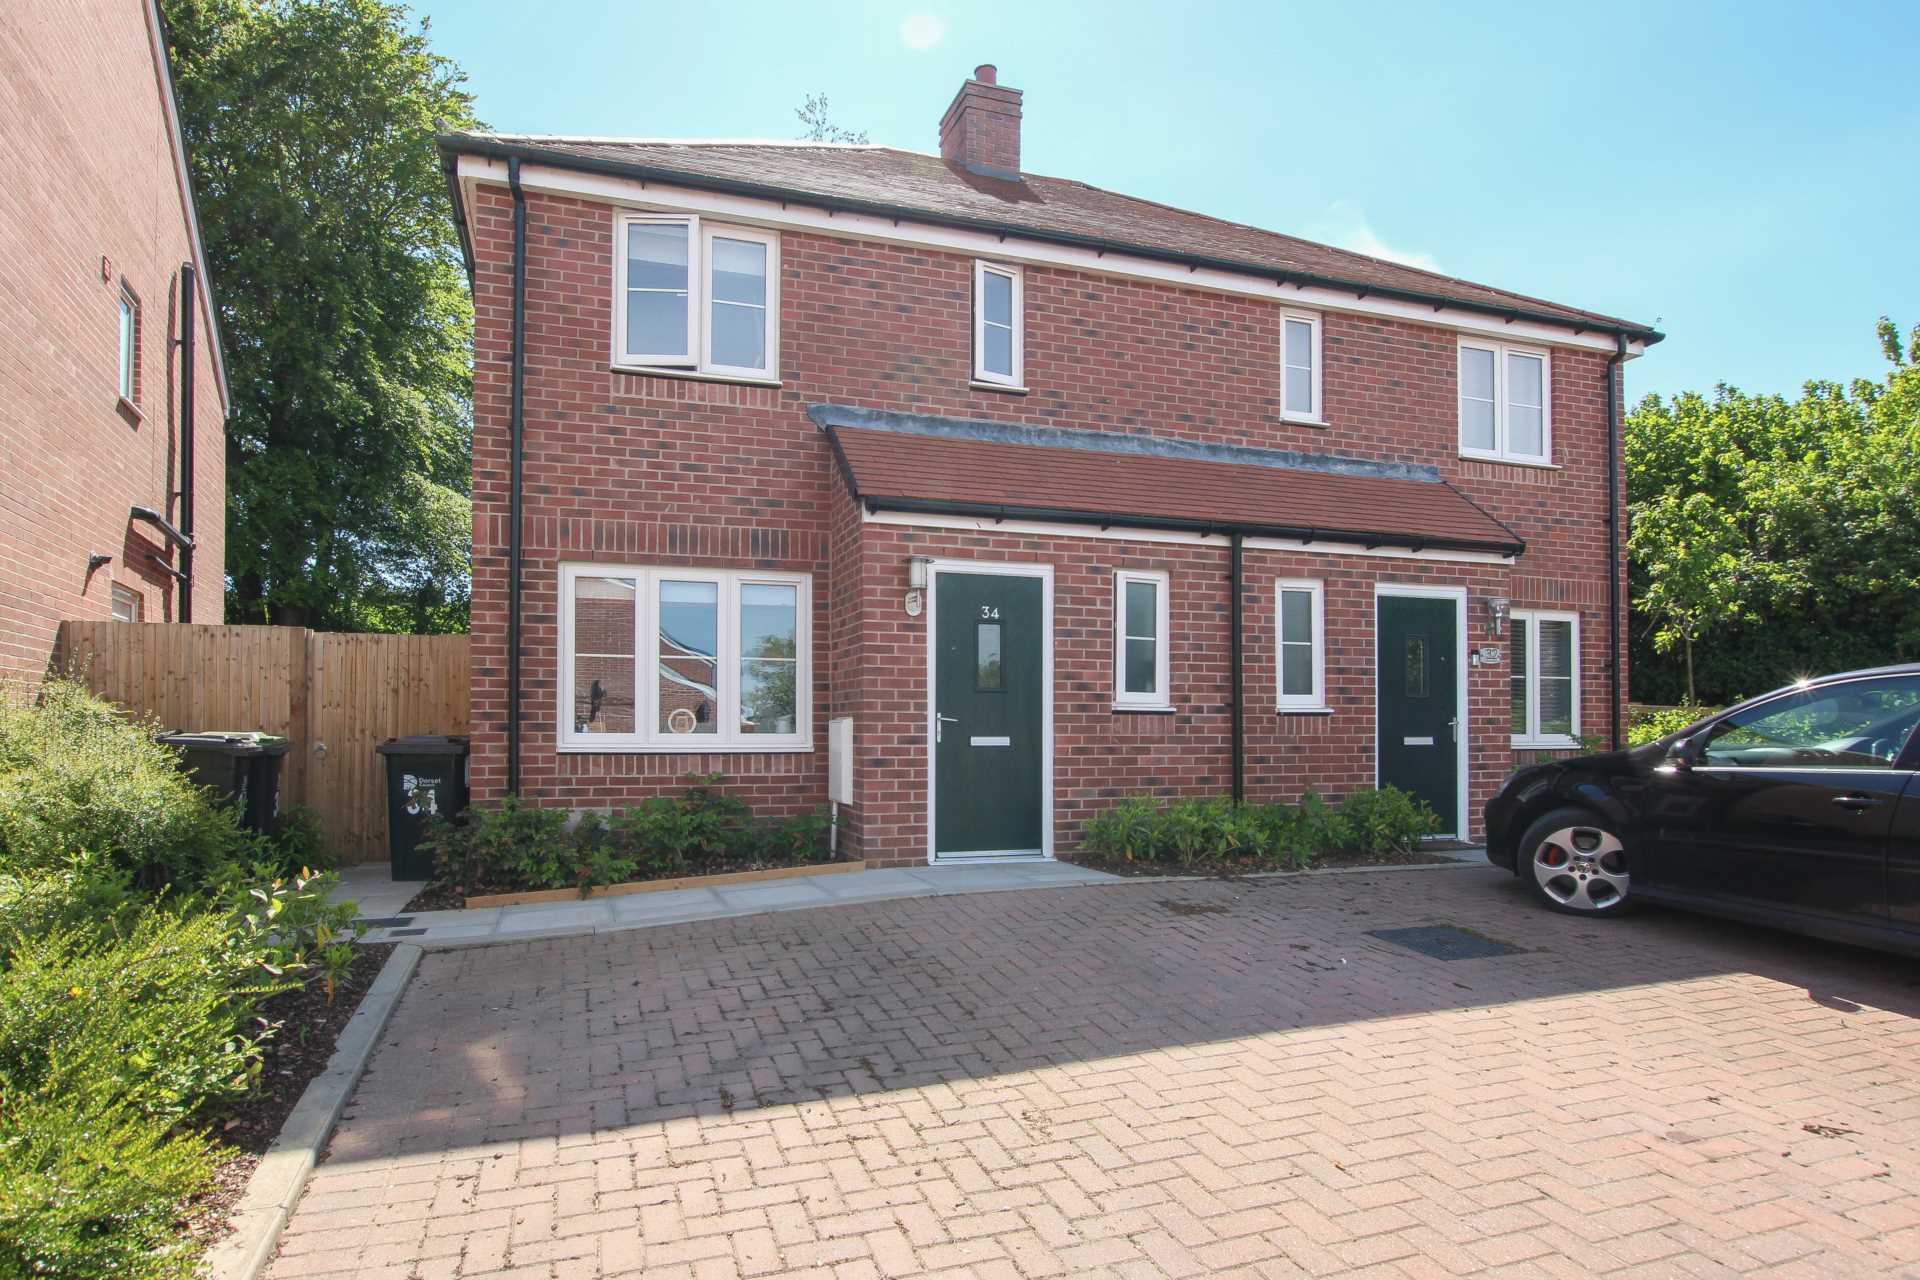 3 bed semi-detached house for sale in Esme Avenue, Blandford St Mary, Blandford Forum  - Property Image 1